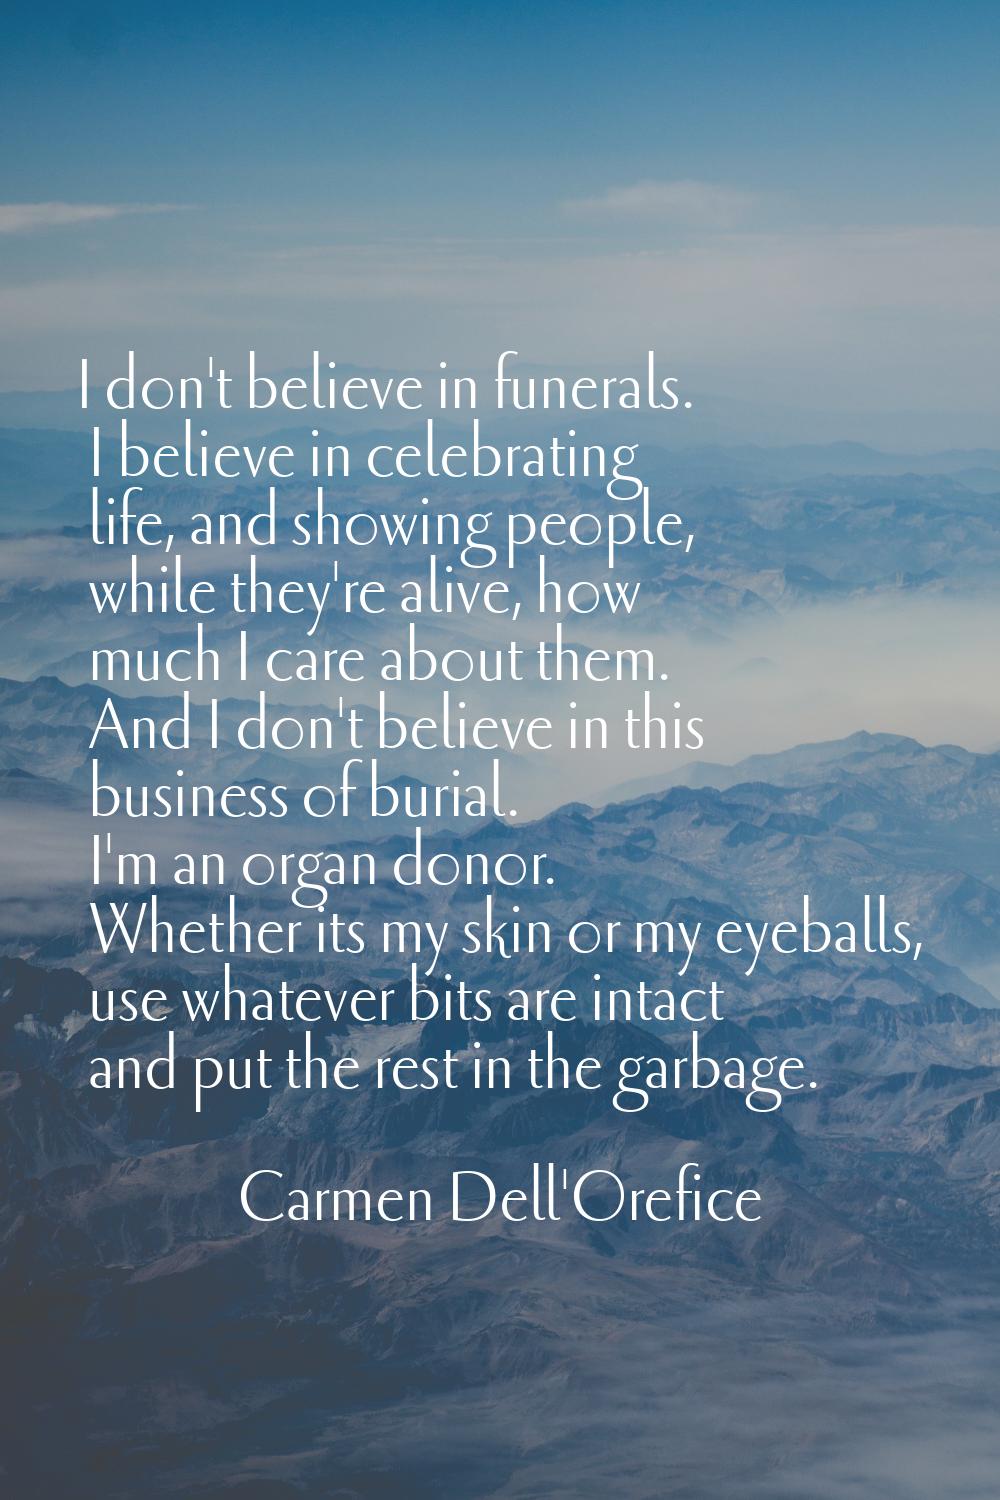 I don't believe in funerals. I believe in celebrating life, and showing people, while they're alive